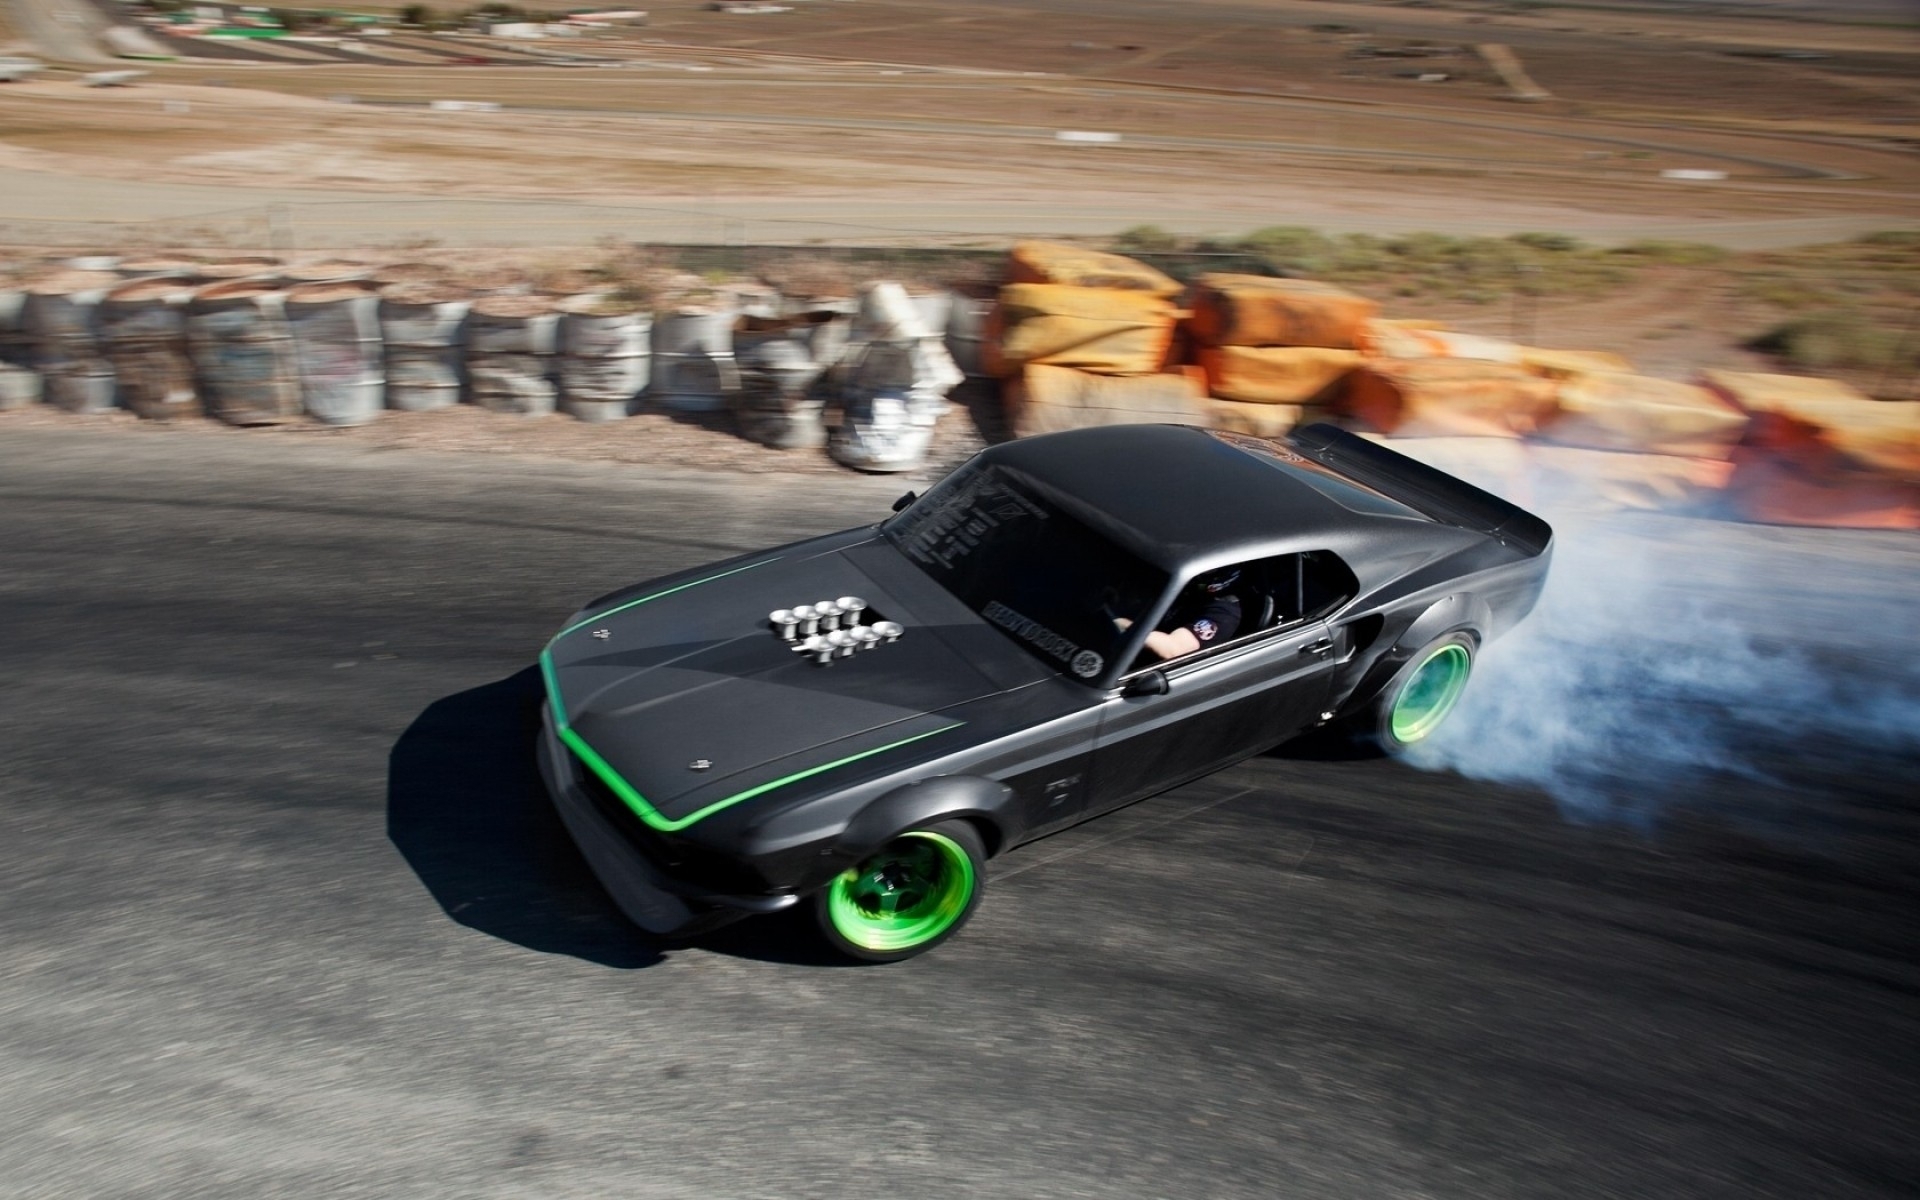 ford, Mustang, Hot, Rod, Classic, Muscle, Cars, Racing, Drift, Tuning, Race, Track Wallpaper